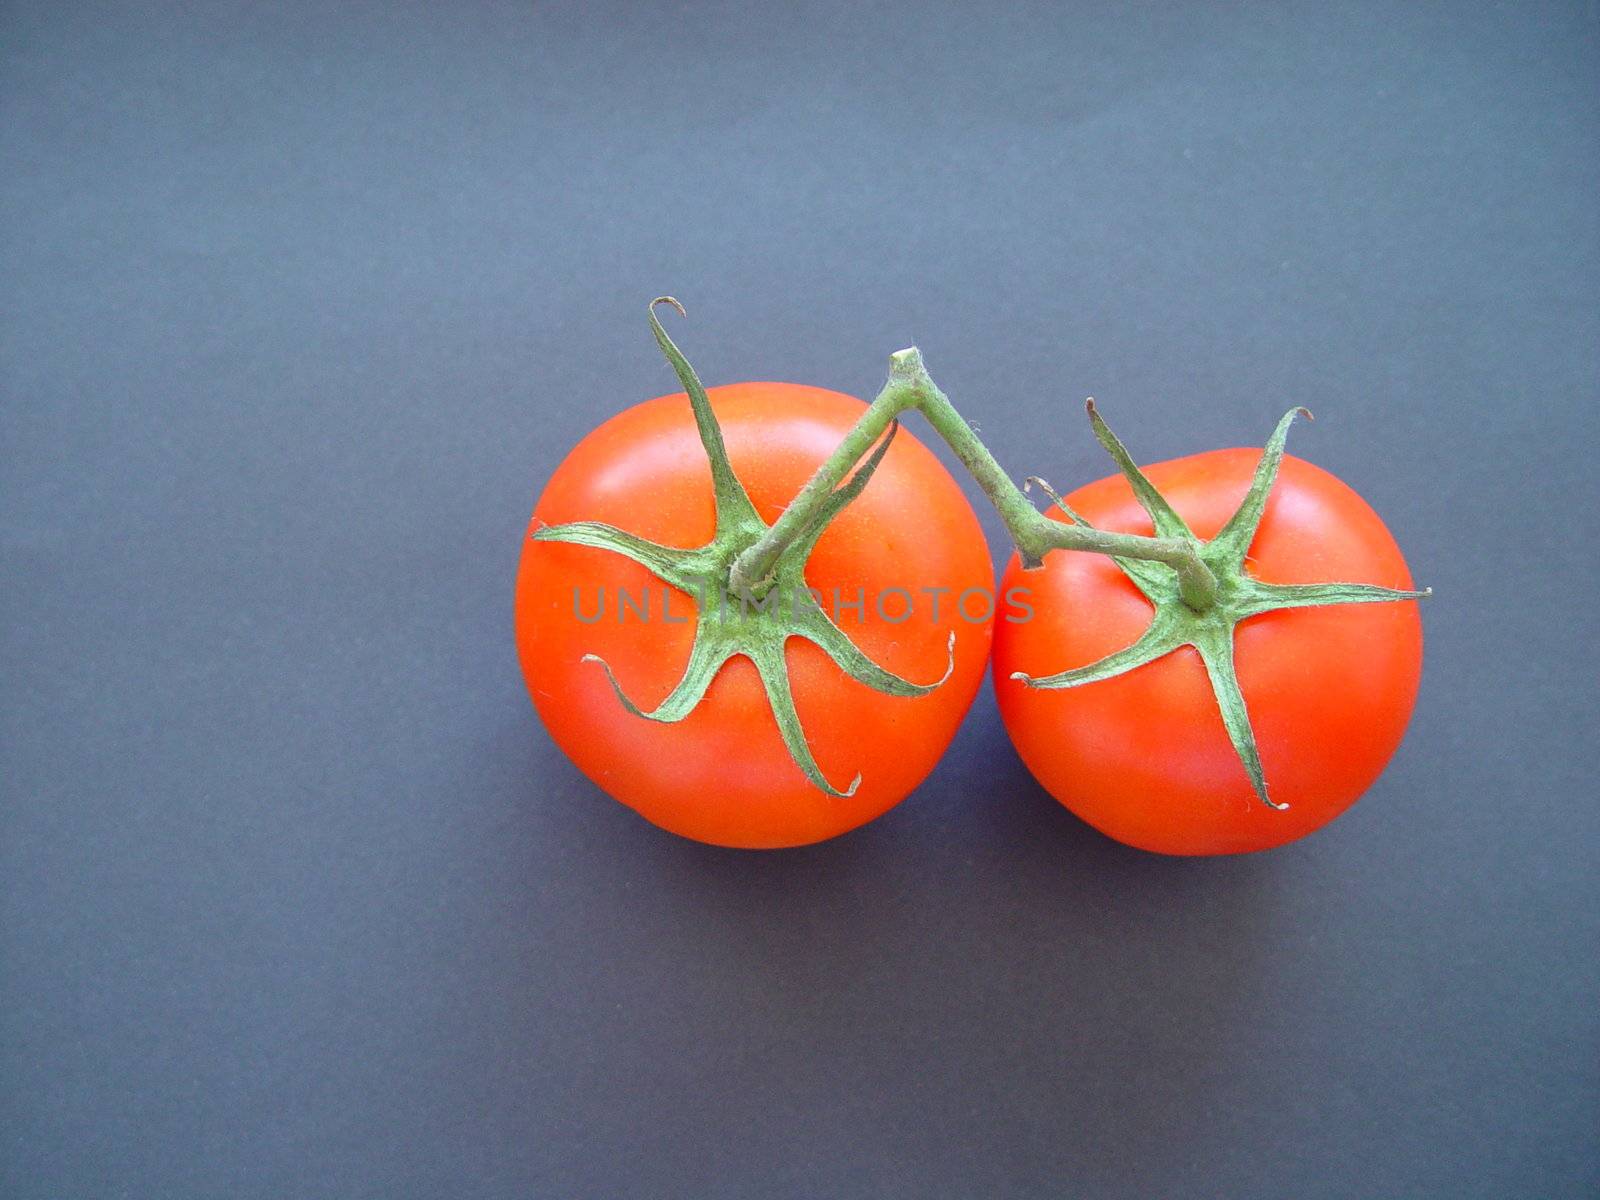 Tomatoes by Flaps